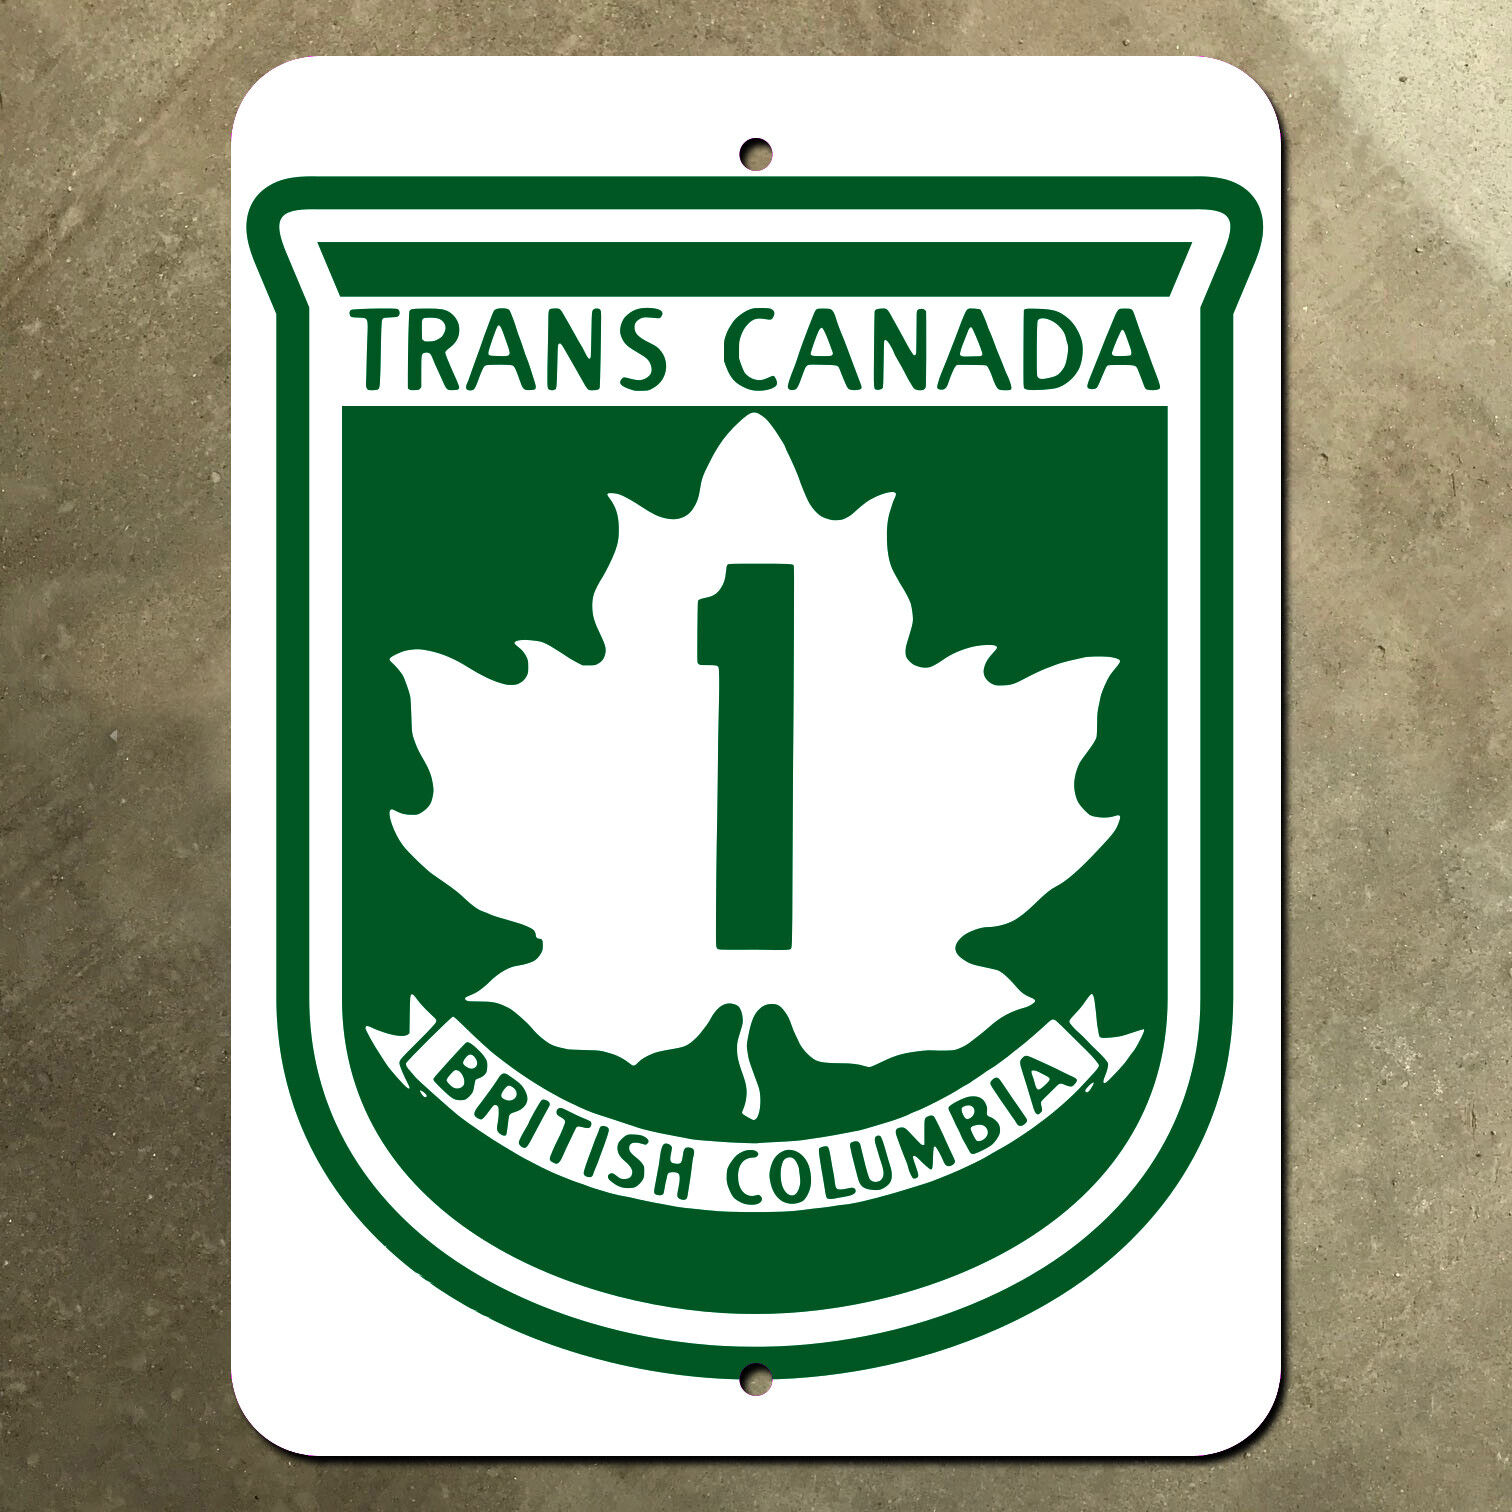 British Columbia Trans-Canada highway 1 route marker road sign 1962 12x16